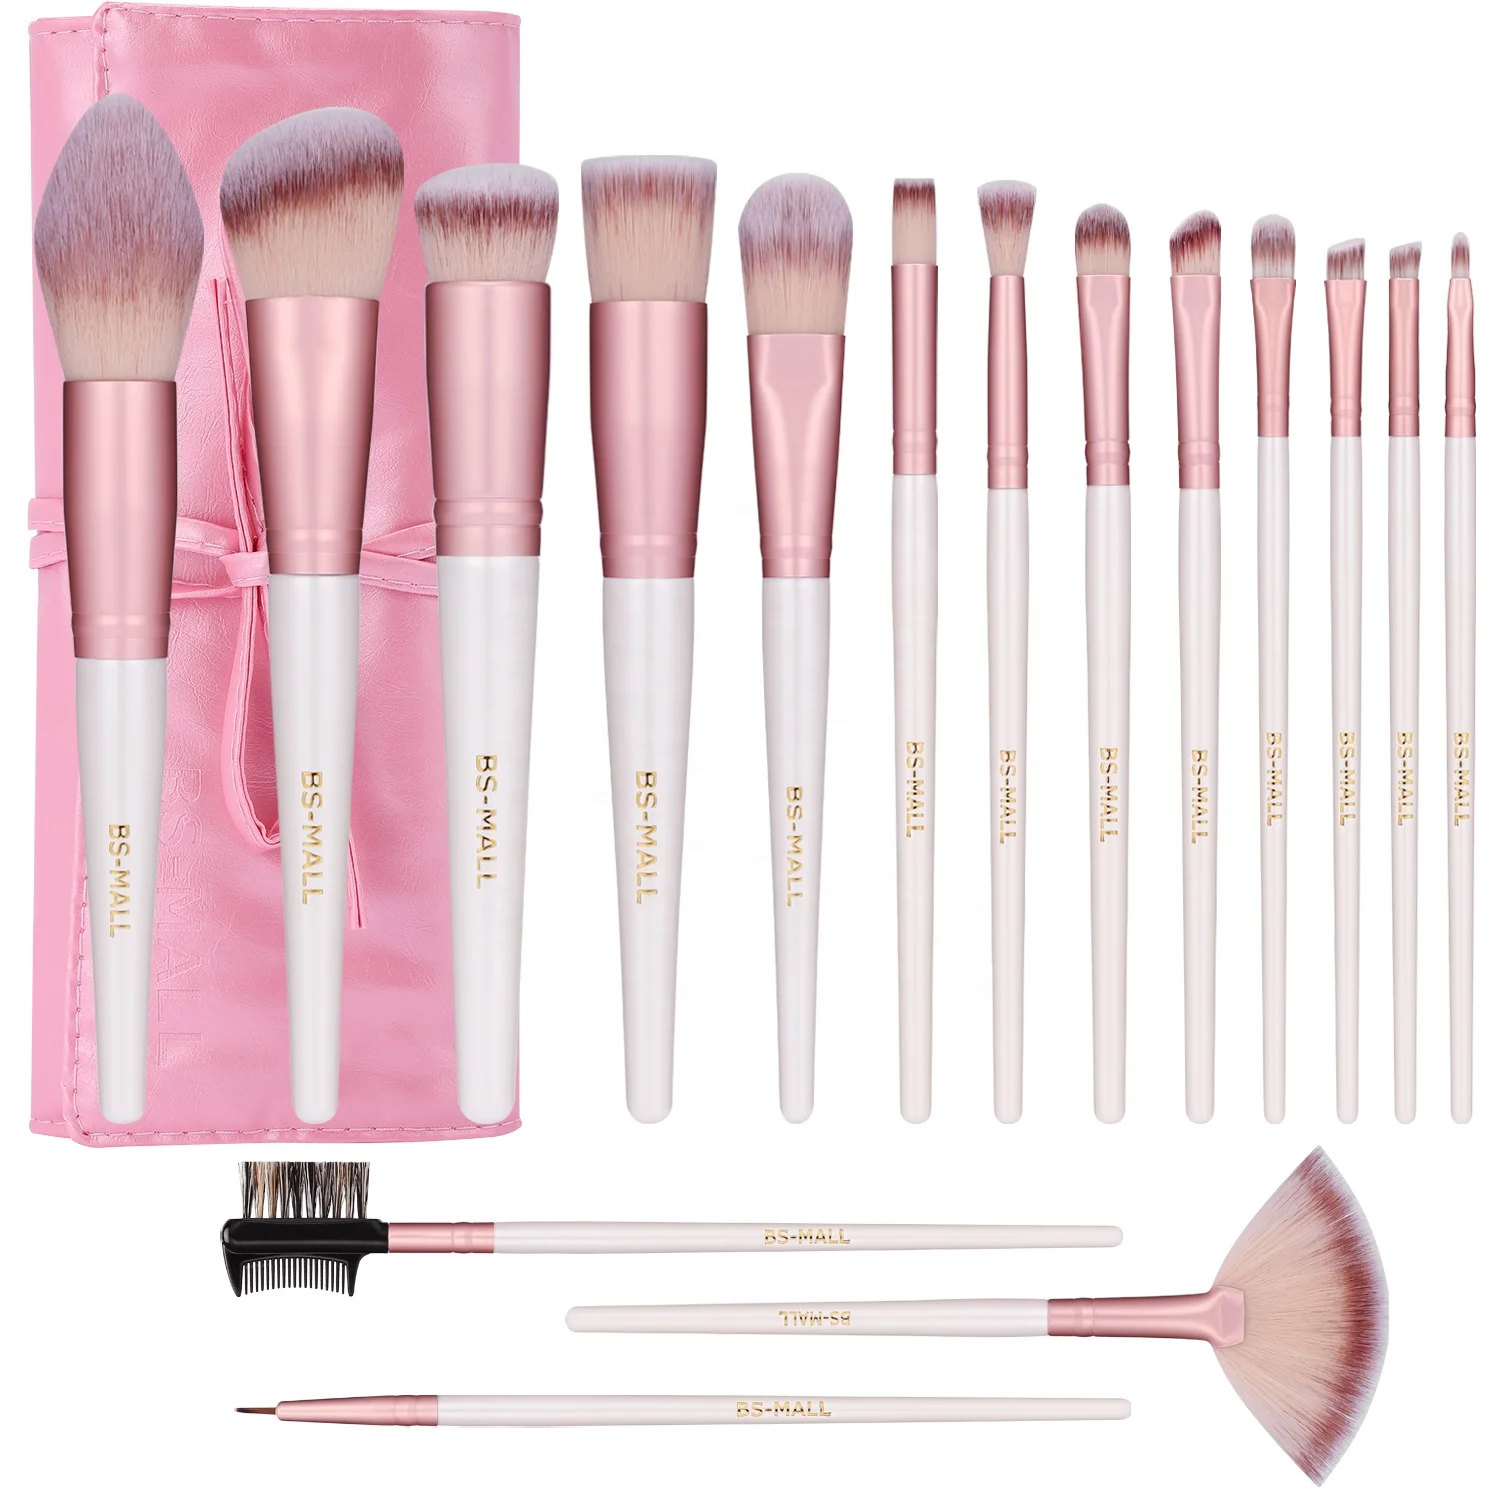 

BS-MALL LOW MOQ Makeup Brush Set 16PCS Private Label Cosmetic Brushes White Pink Makeup Brushes With Pu Bag